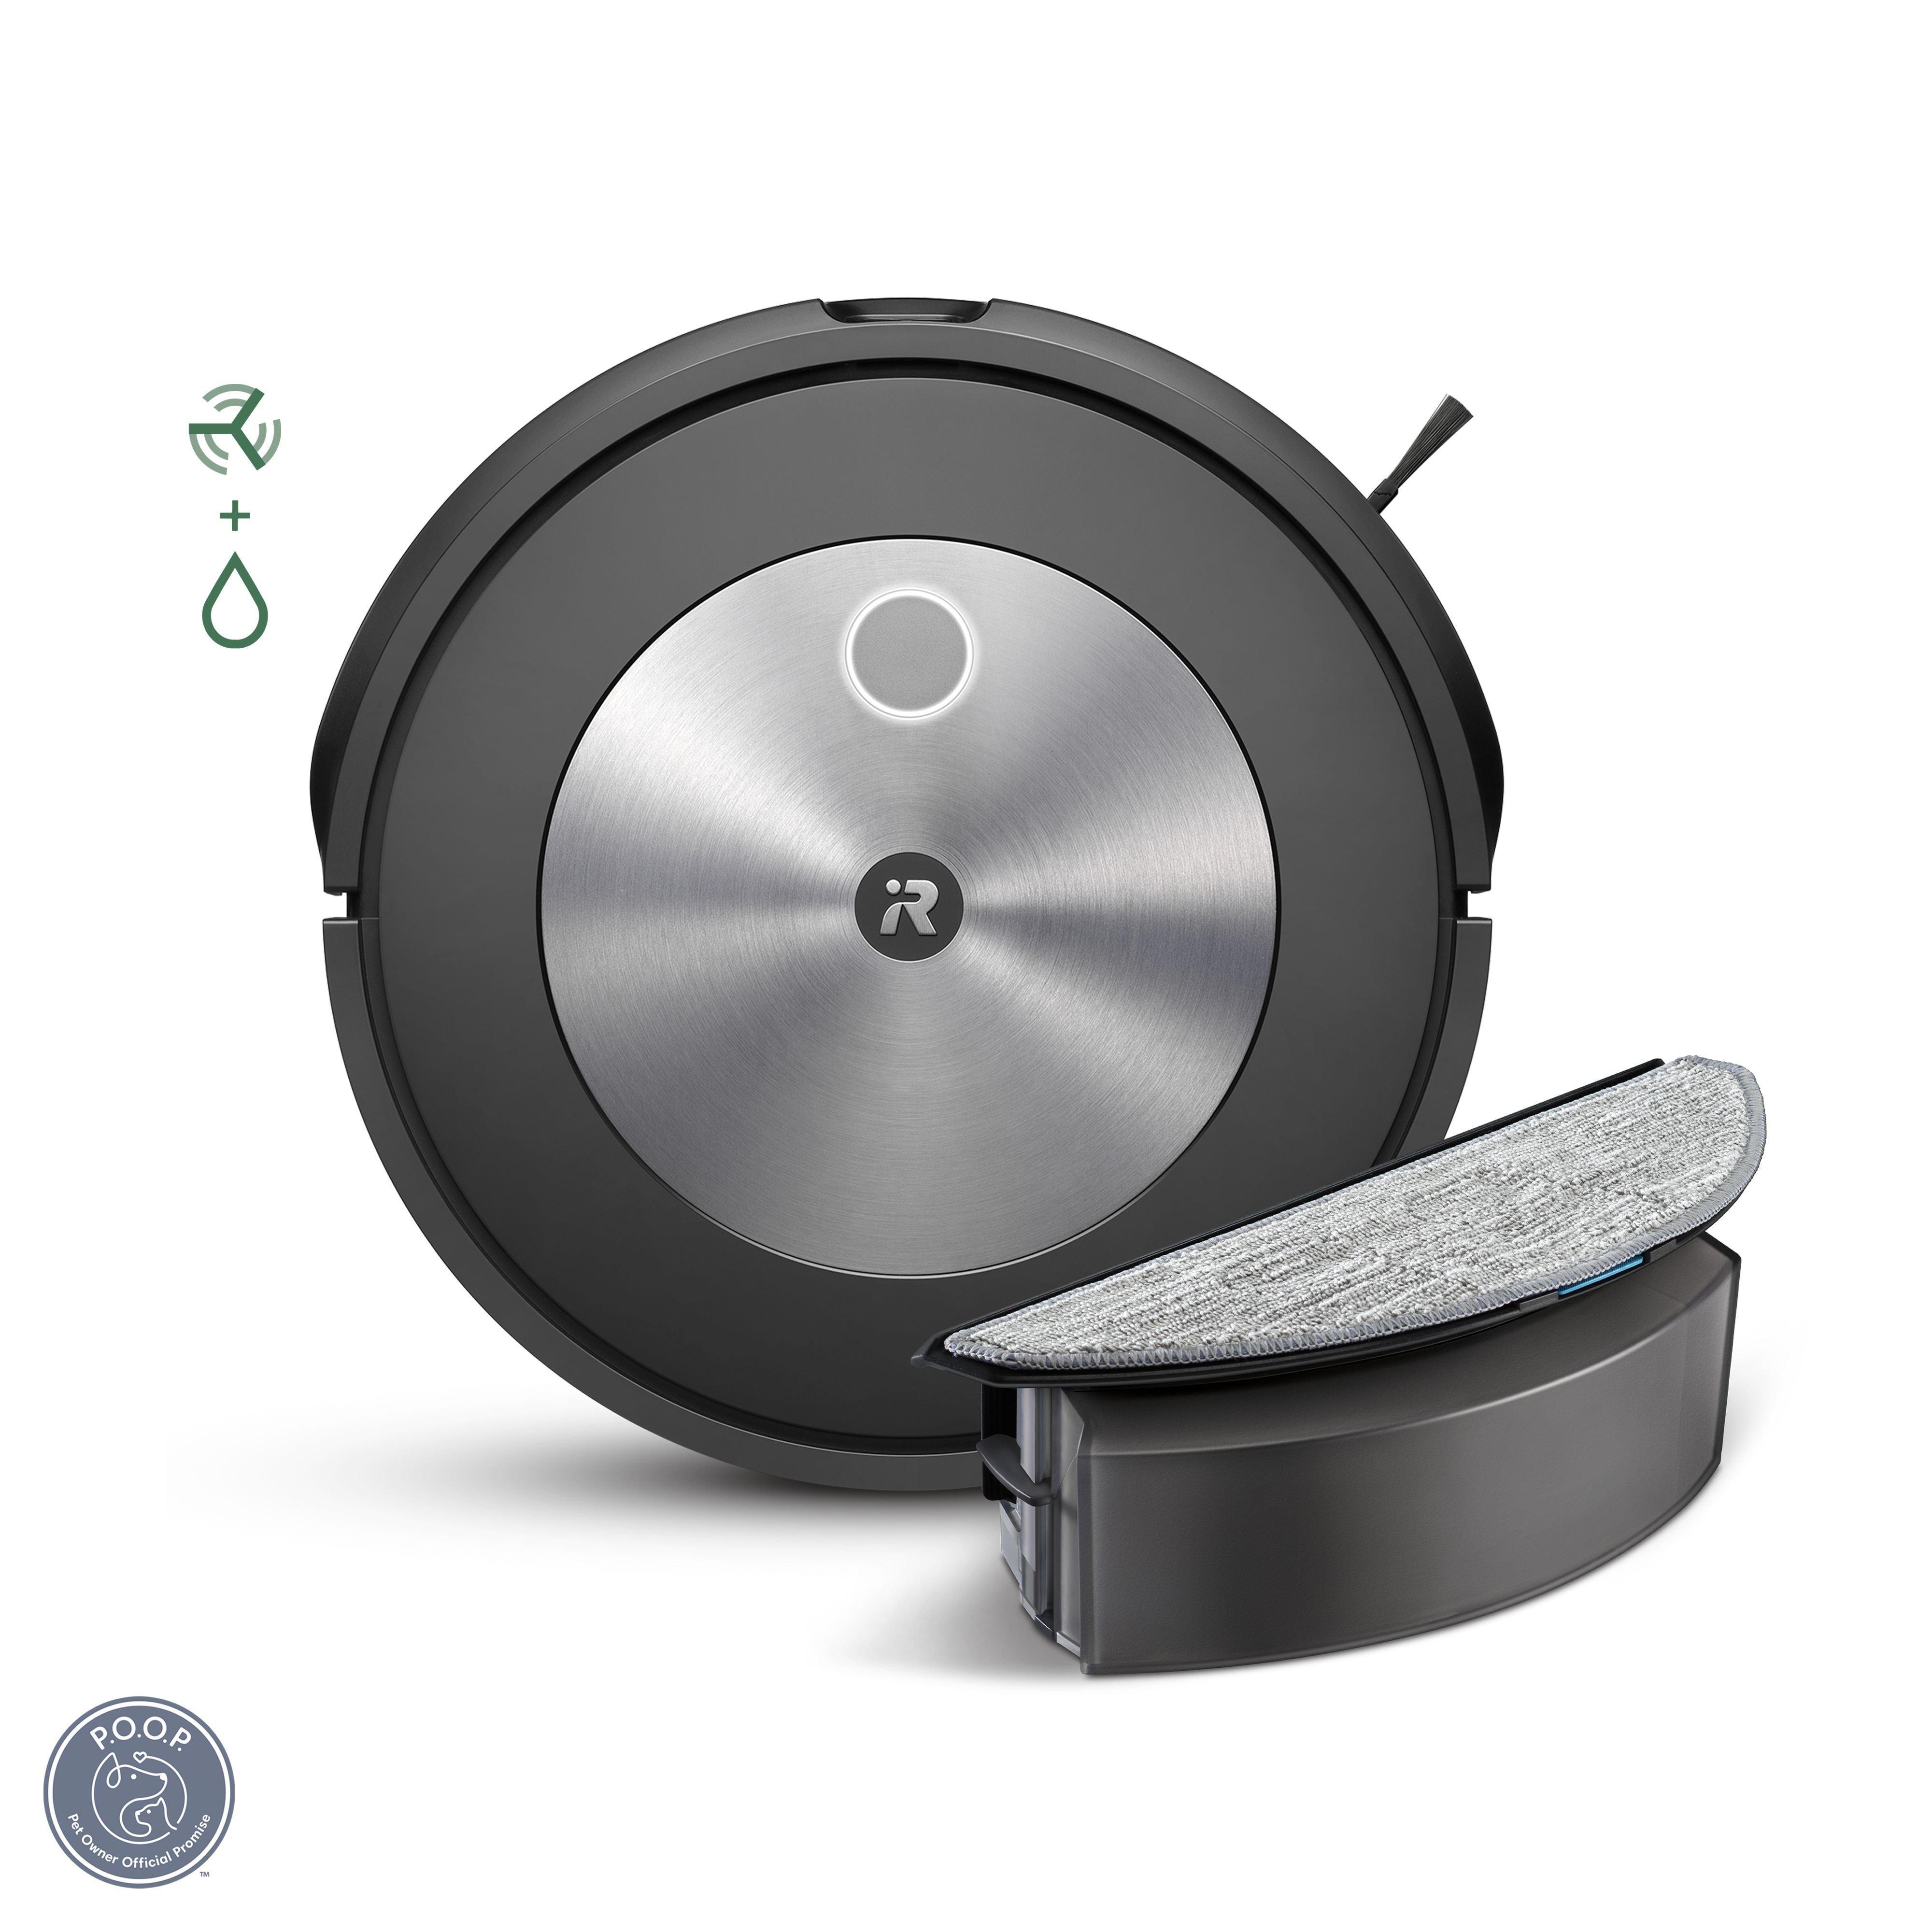 iRobot Roomba j7 Wi-Fi Connected Robot Vacuum - Identifies and avoids  Obstacles Like pet Waste & Cords, Smart Mapping, Works with Alexa, Ideal  for Pet